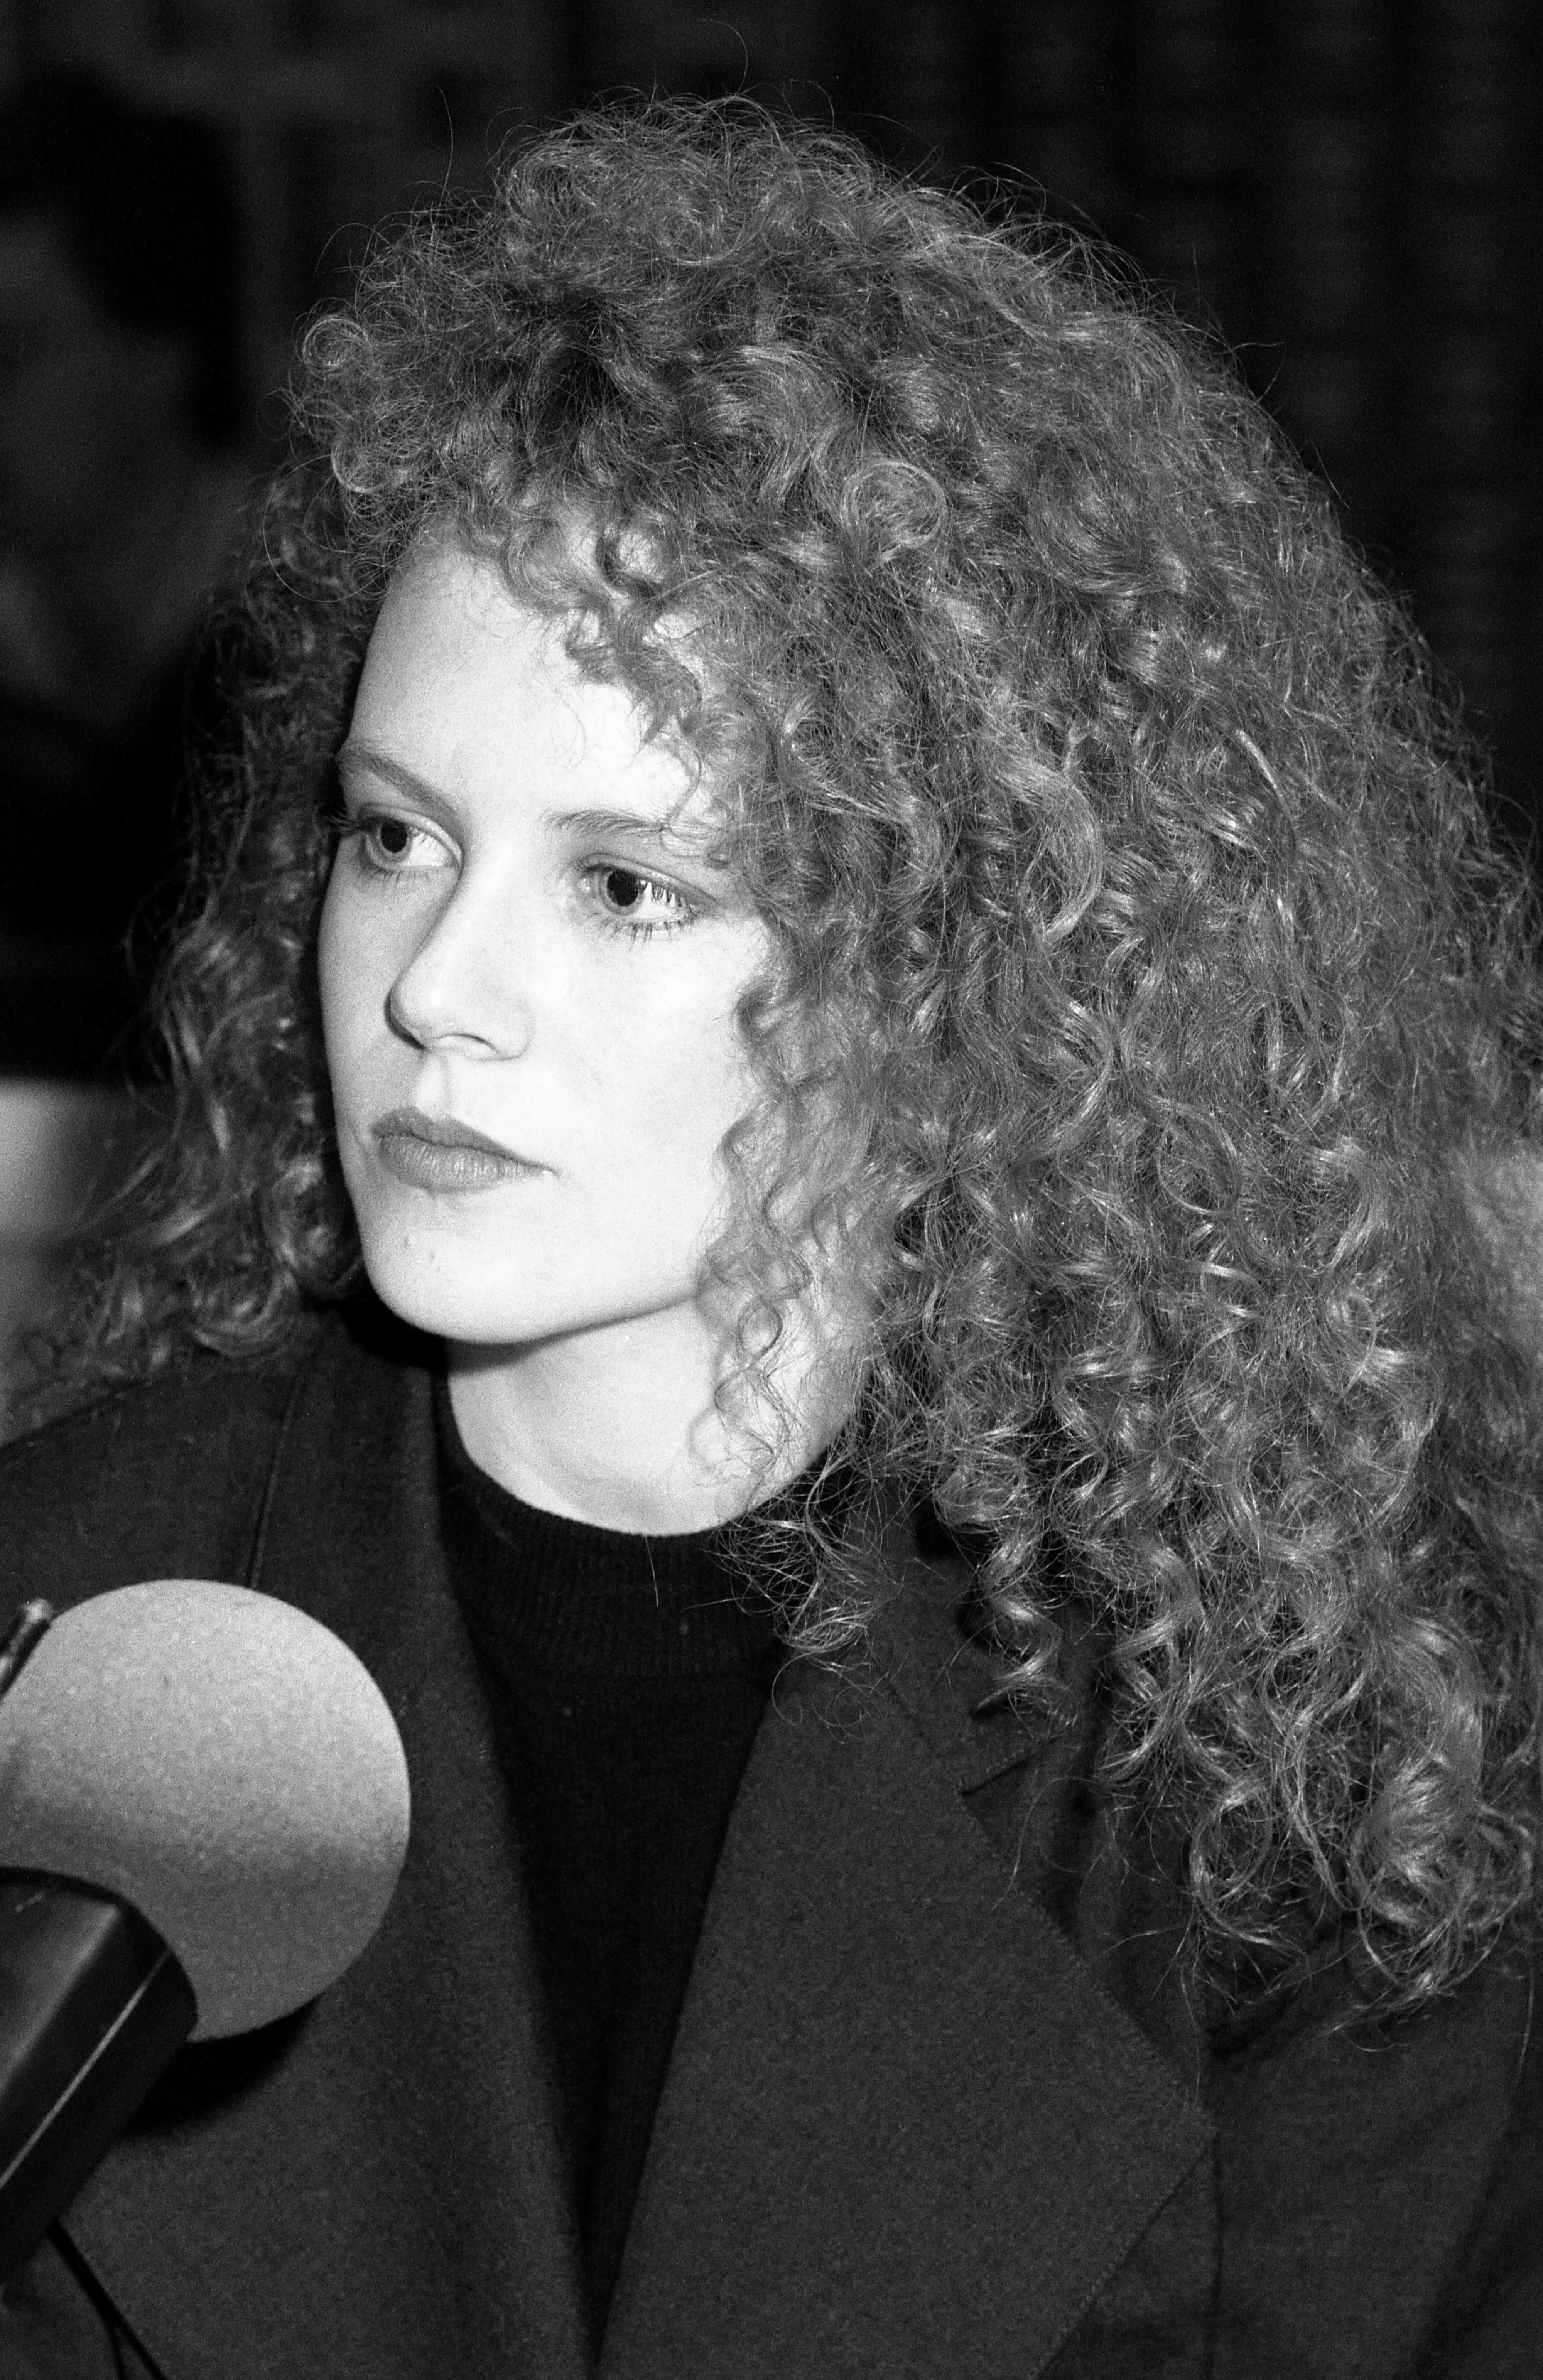 With long, curly hair in front of a microphone